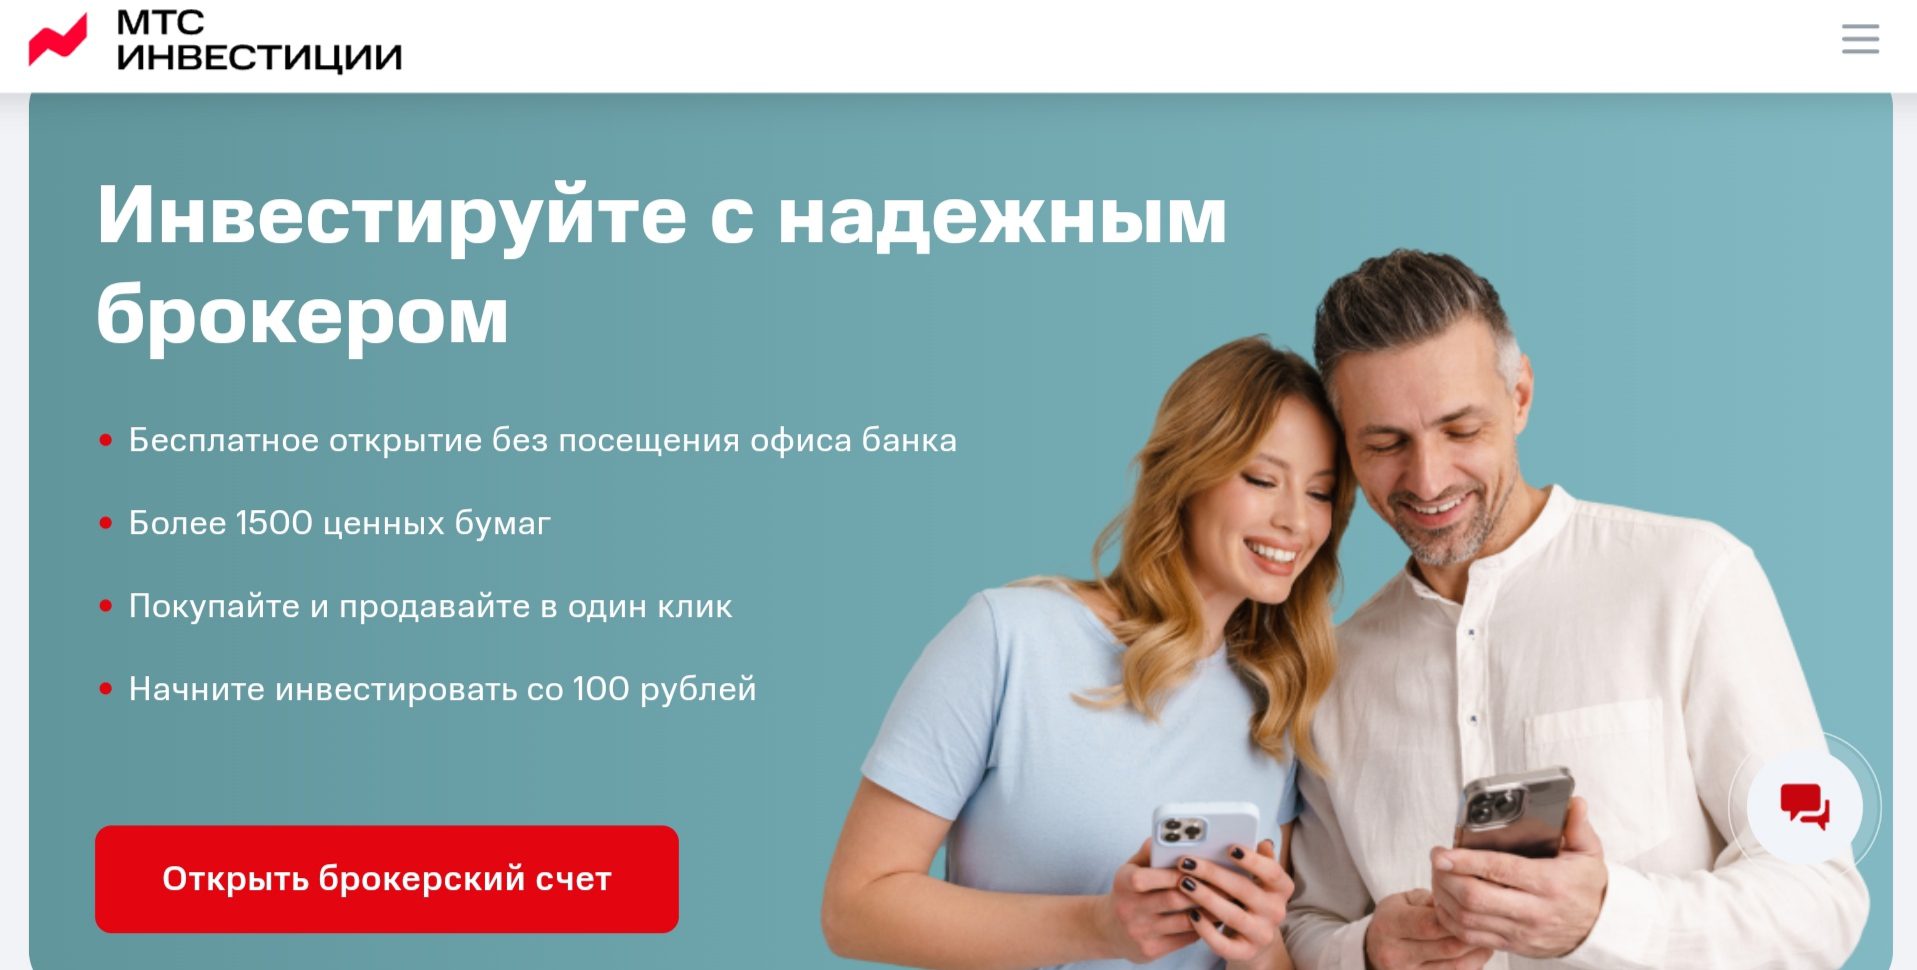 Сайт Mts investments